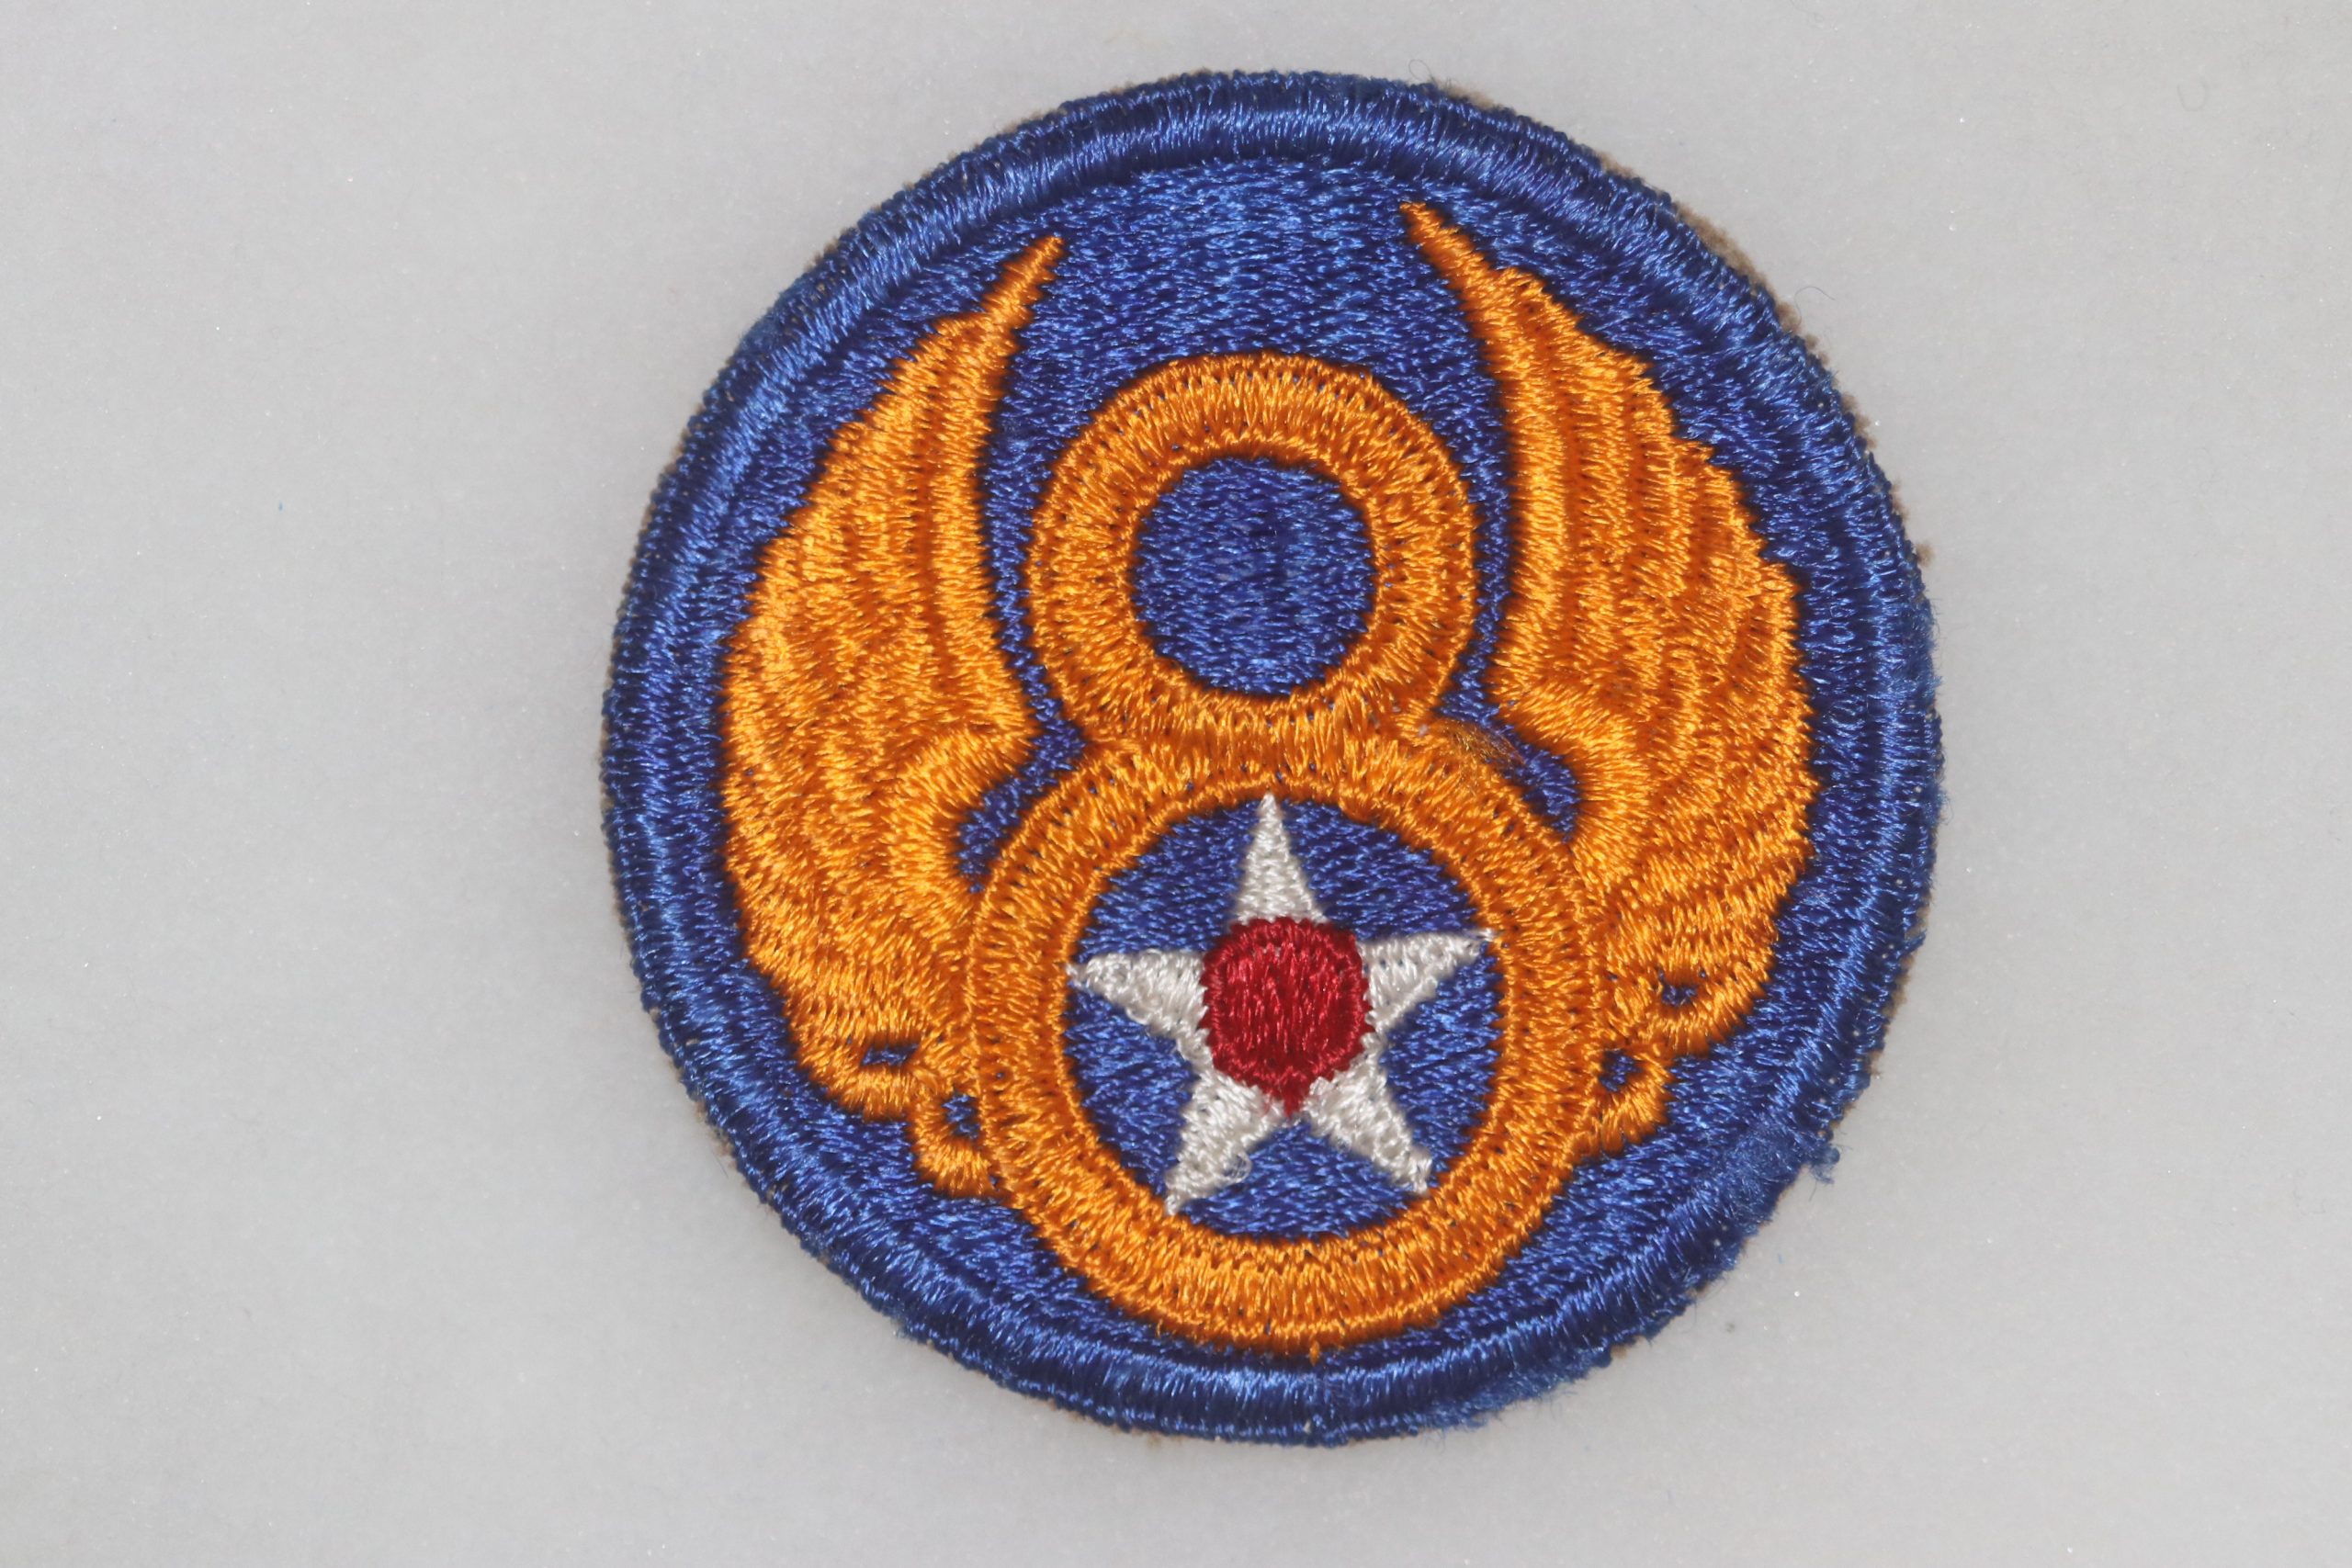 WW2 2ND ARMY AIR FORCE PATCH USP815 